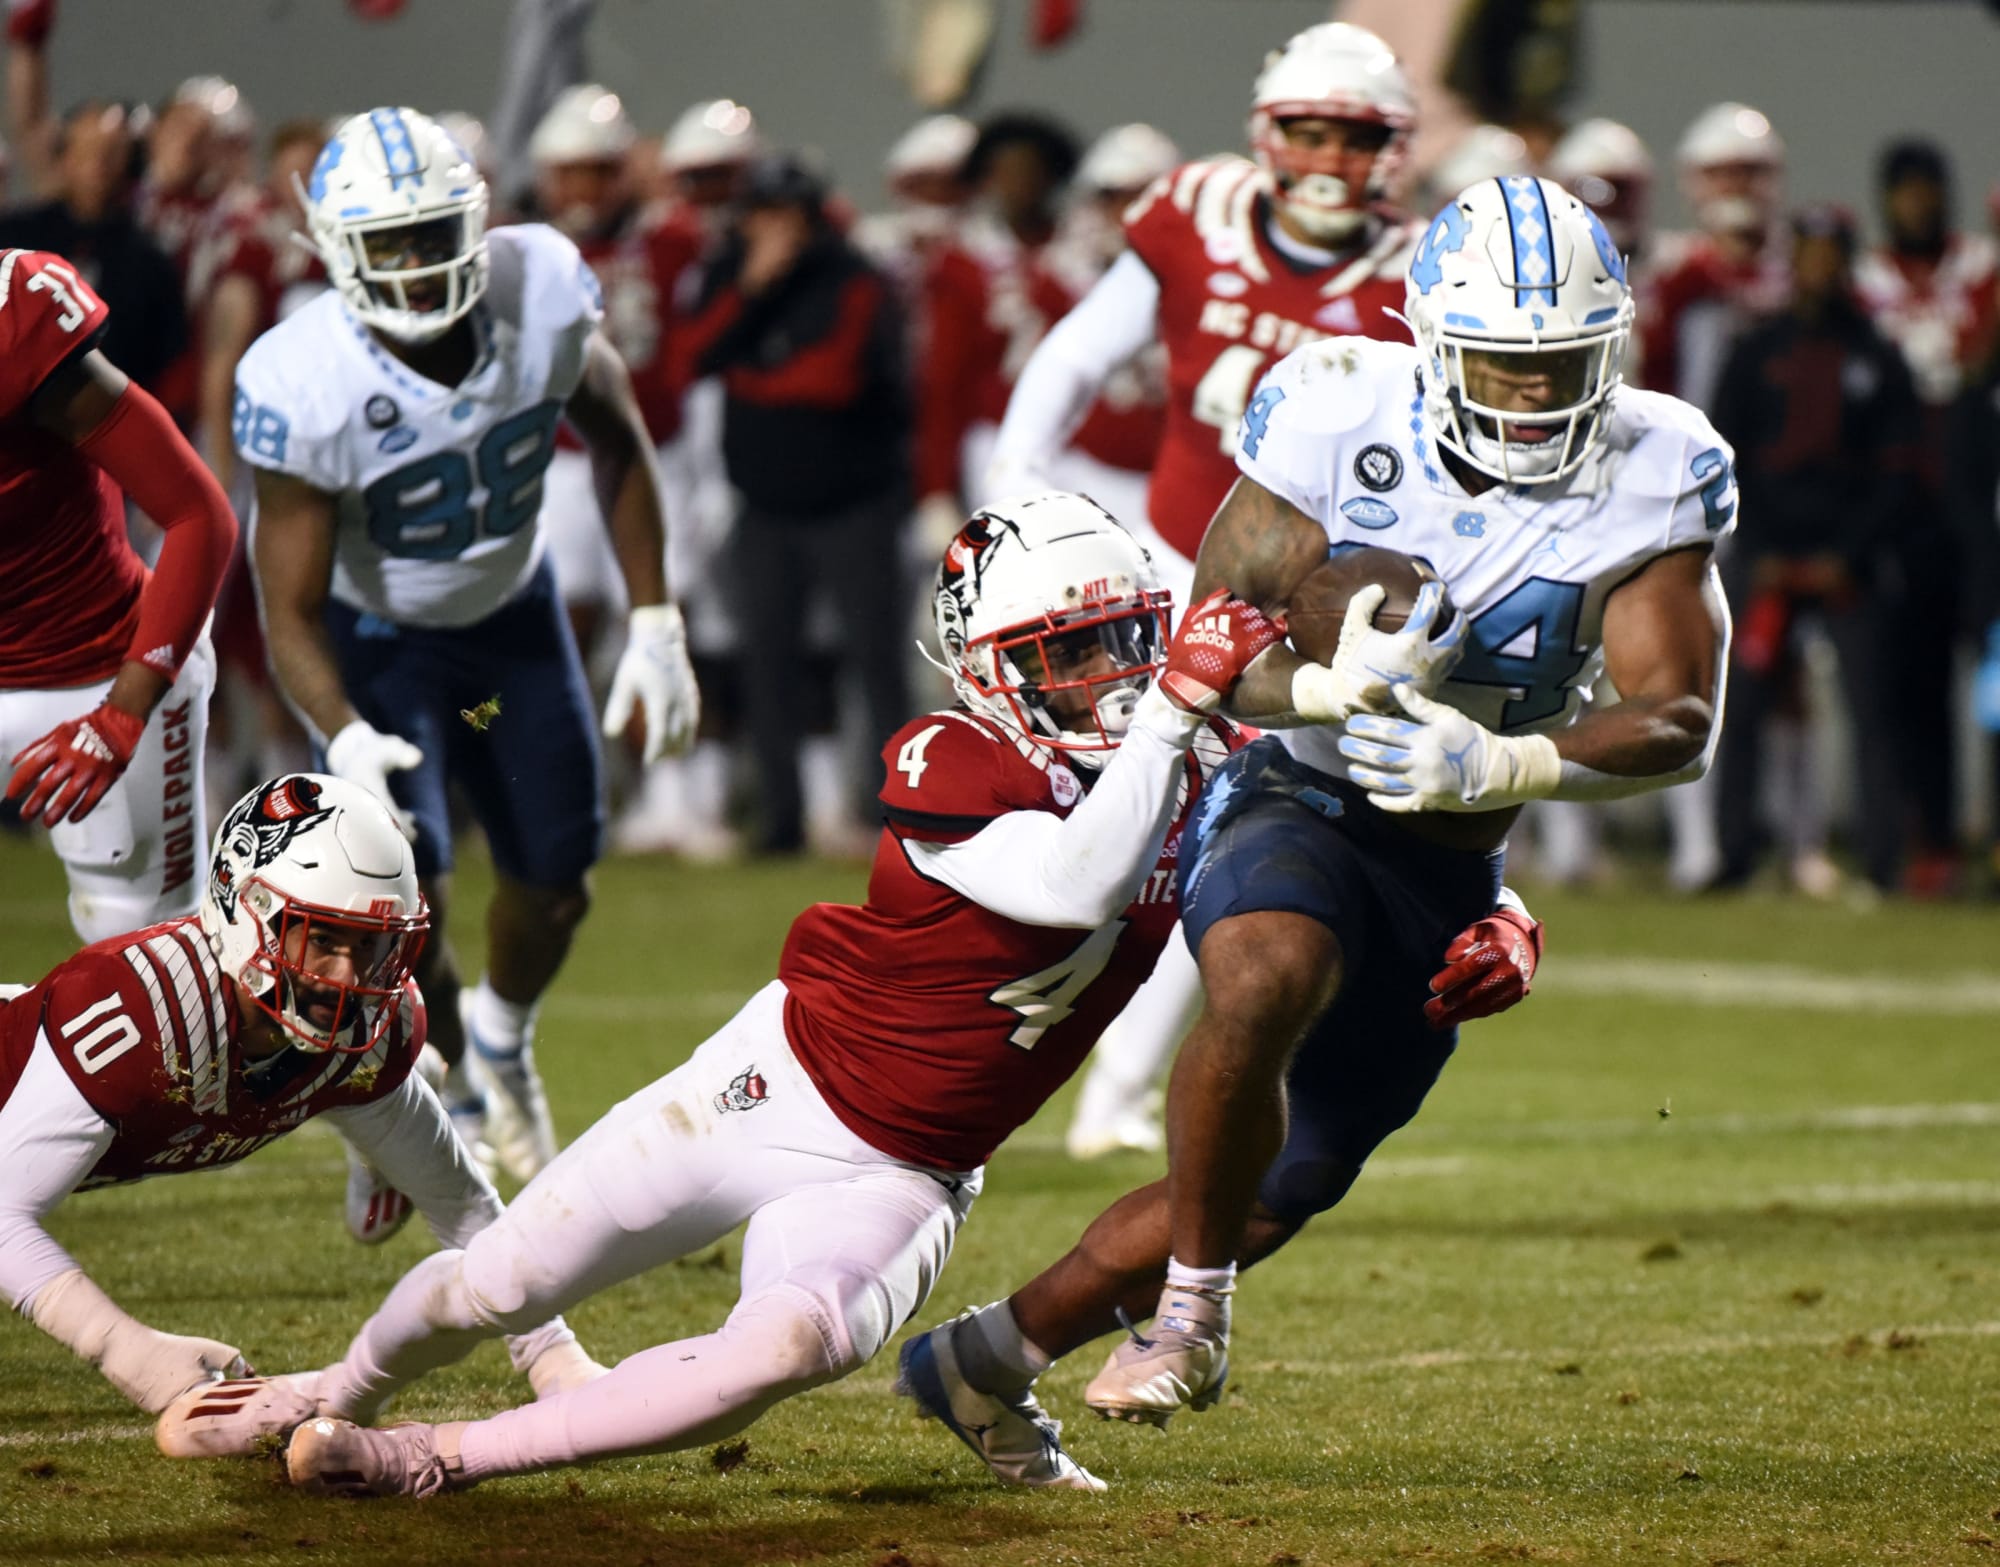 Injured UNC RB British Brooks to take on a new role as a student coach